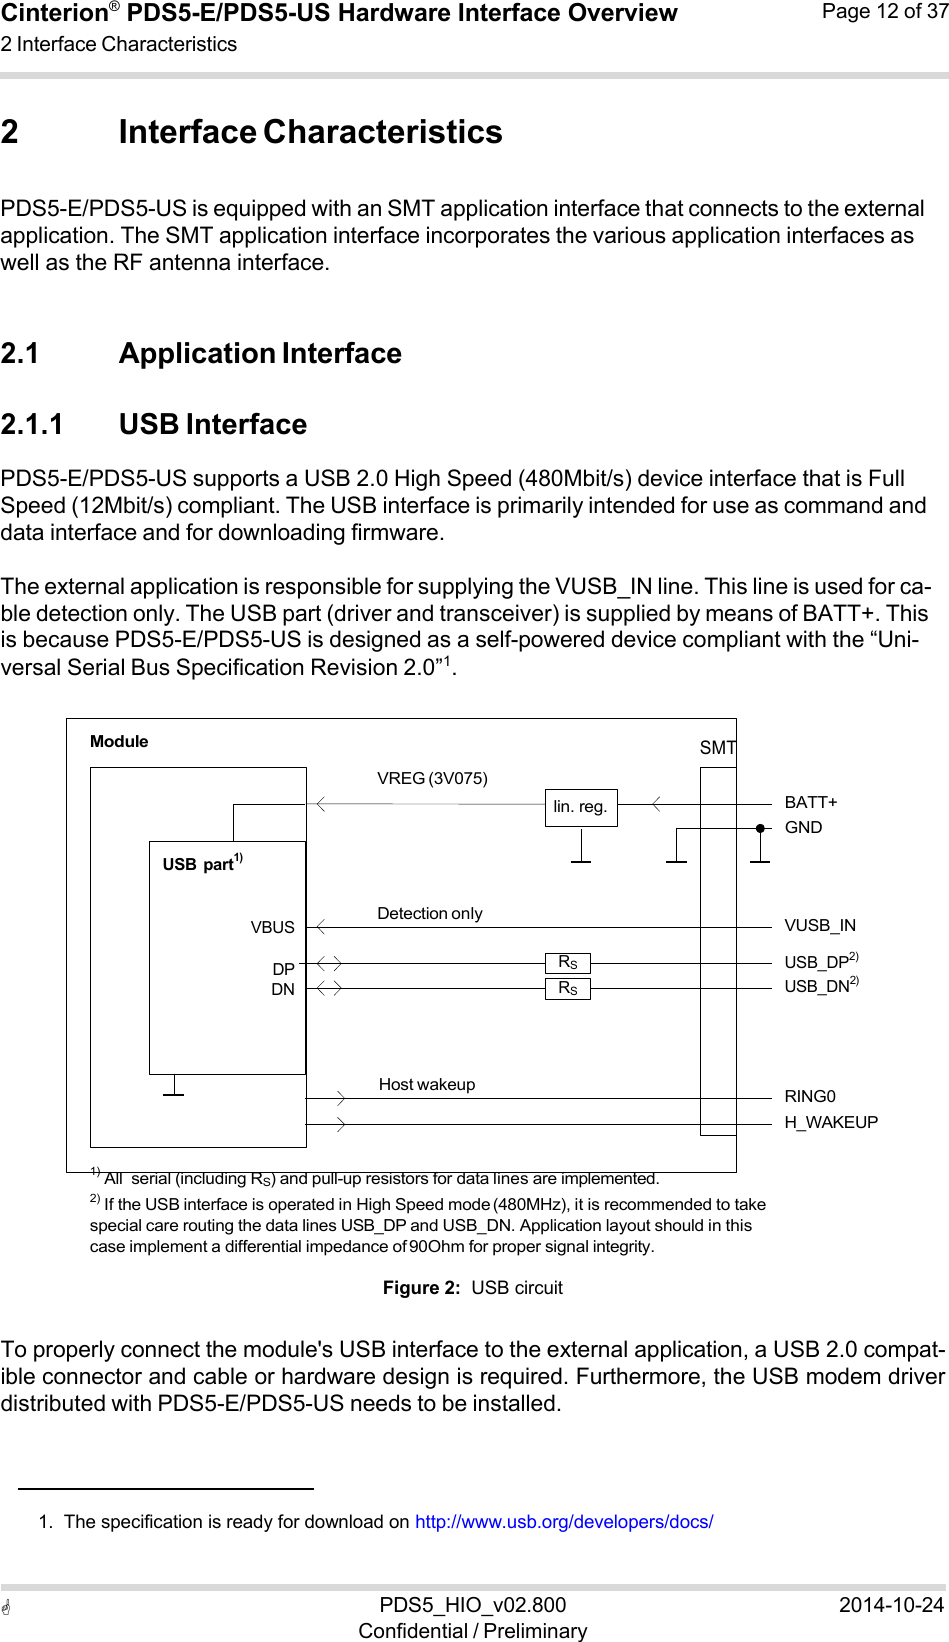  PDS5_HIO_v02.800Confidential / Preliminary2014-10-24Cinterion®  PDS5-E/PDS5-US Hardware Interface Overview2 Interface Characteristics Page 12 of 37   2 Interface Characteristics  PDS5-E/PDS5-US is equipped with an SMT application interface that connects to the external application. The SMT application interface incorporates the various application interfaces as well as the RF antenna interface.   2.1 Application Interface  2.1.1 USB Interface PDS5-E/PDS5-US supports a USB 2.0 High Speed (480Mbit/s) device interface that is Full Speed (12Mbit/s) compliant. The USB interface is primarily intended for use as command and data interface and for downloading firmware.  The external application is responsible for supplying the VUSB_IN line. This line is used for ca- ble detection only. The USB part (driver and transceiver) is supplied by means of BATT+. This is because PDS5-E/PDS5-US is designed as a self-powered device compliant with the “Uni- versal Serial Bus Specification Revision 2.0”1.   Module       USB  part1)    VREG (3V075)      lin. reg.  SMT     BATT+ GND   VBUS  DP DN Detection only  RS RS  VUSB_IN USB_DP2) USB_DN2)    Host wakeup   RING0 H_WAKEUP  1) All  serial (including RS) and pull-up resistors for data lines are implemented. 2) If the USB interface is operated in High Speed mode (480MHz), it is recommended to take special care routing the data lines USB_DP and USB_DN. Application layout should in this case implement a differential impedance of 90Ohm for proper signal integrity.  Figure 2:  USB circuit  To properly connect the module&apos;s USB interface to the external application, a USB 2.0 compat- ible connector and cable or hardware design is required. Furthermore, the USB modem driver distributed with PDS5-E/PDS5-US needs to be installed.      1.  The specification is ready for download on http://www.usb.org/developers/docs/ 